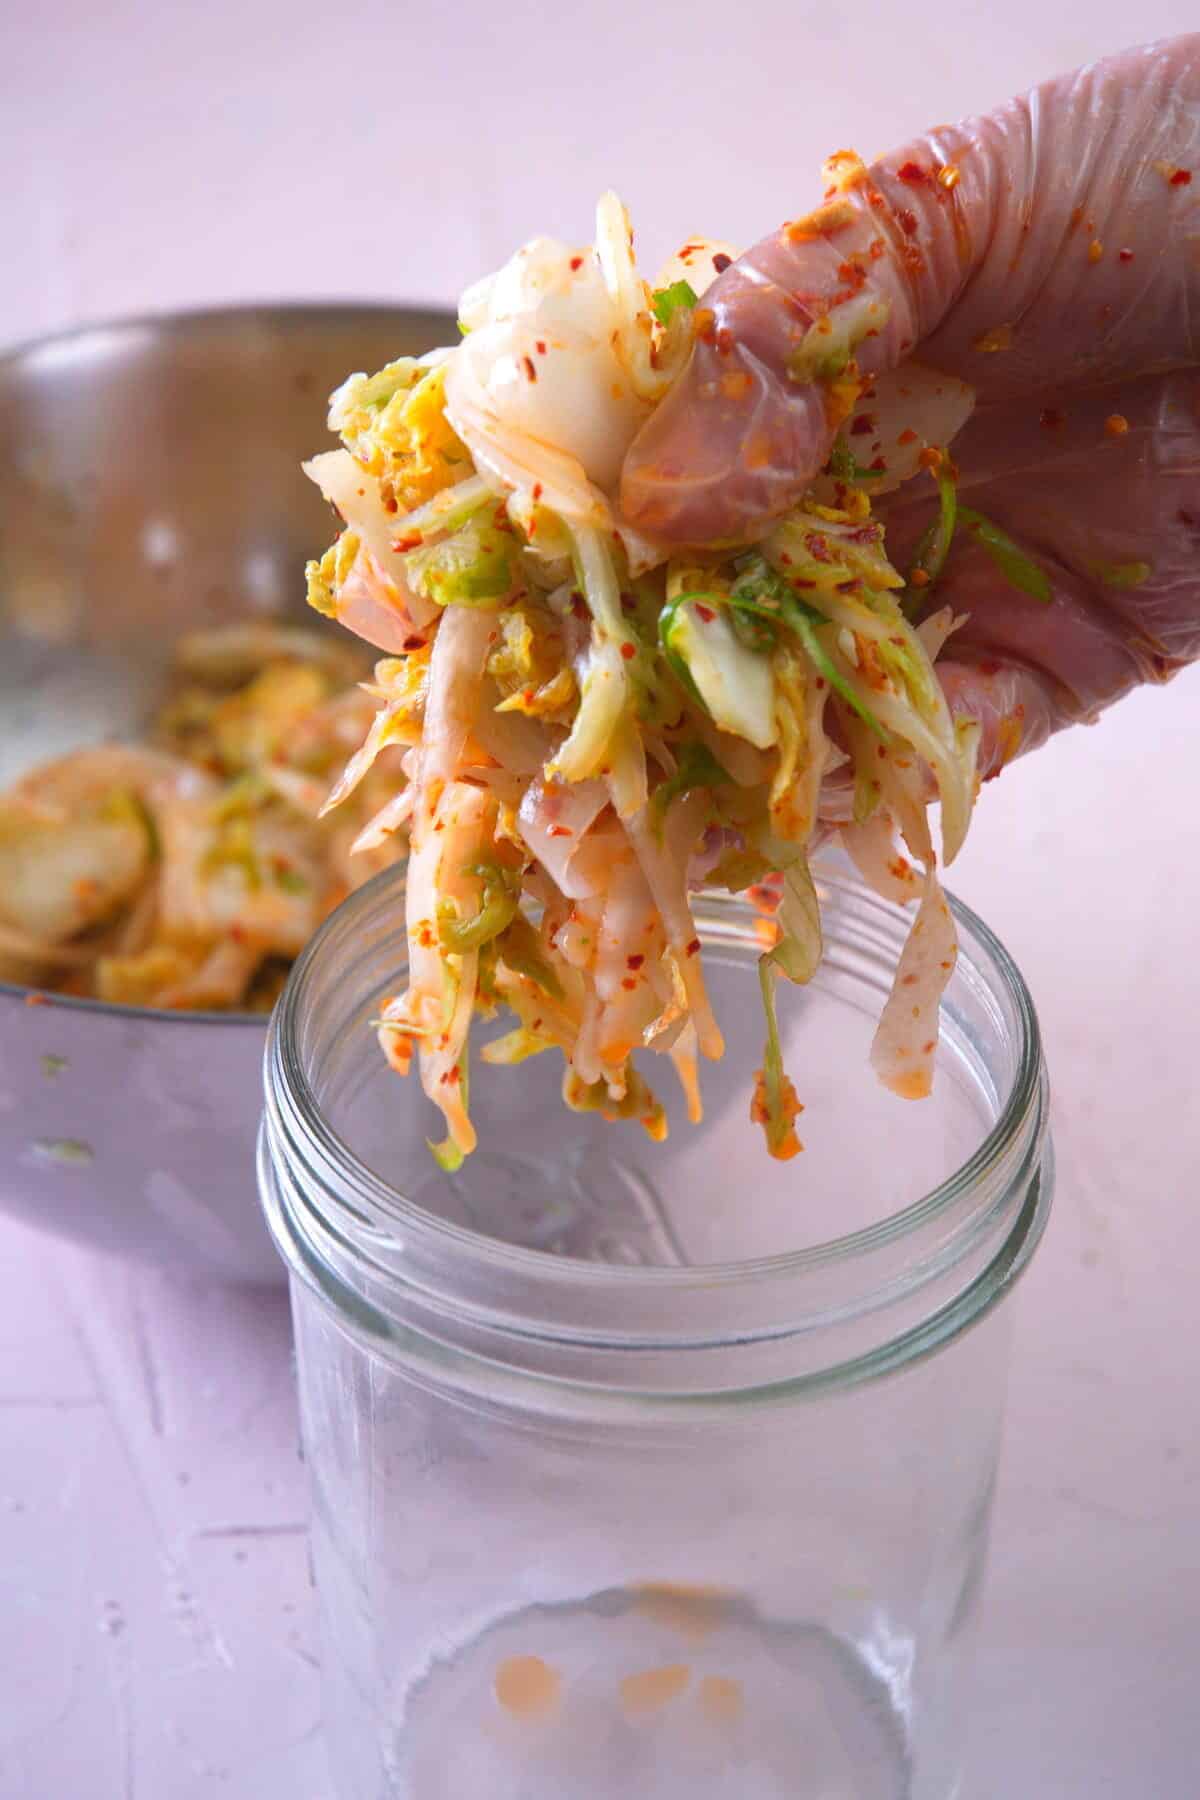 A hand holding kimchi over a jar.